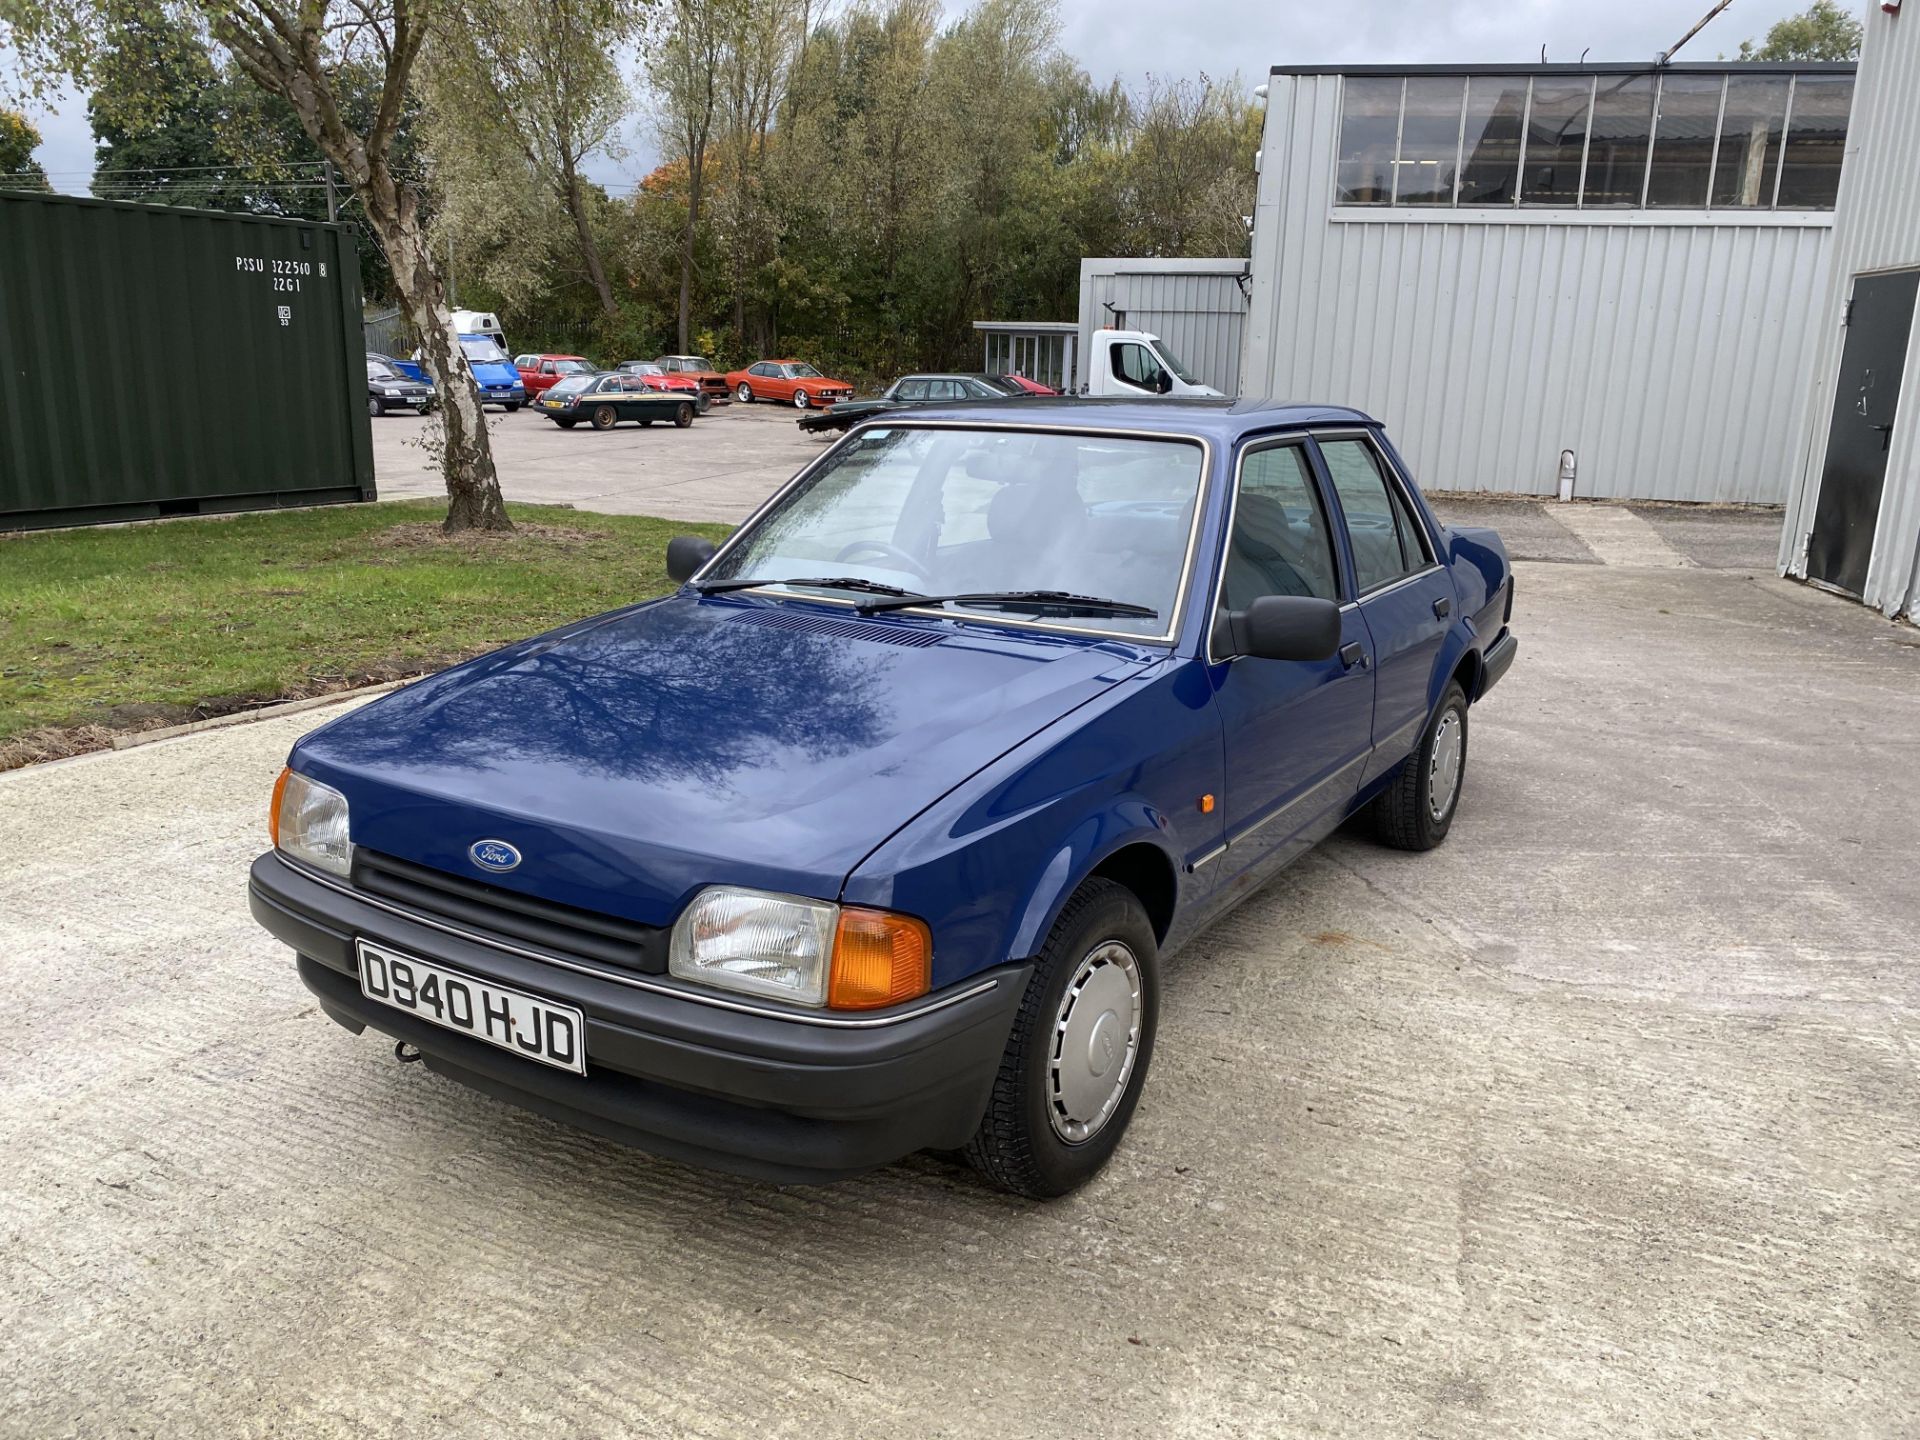 Ford Orion 1.6 GL - Image 9 of 42